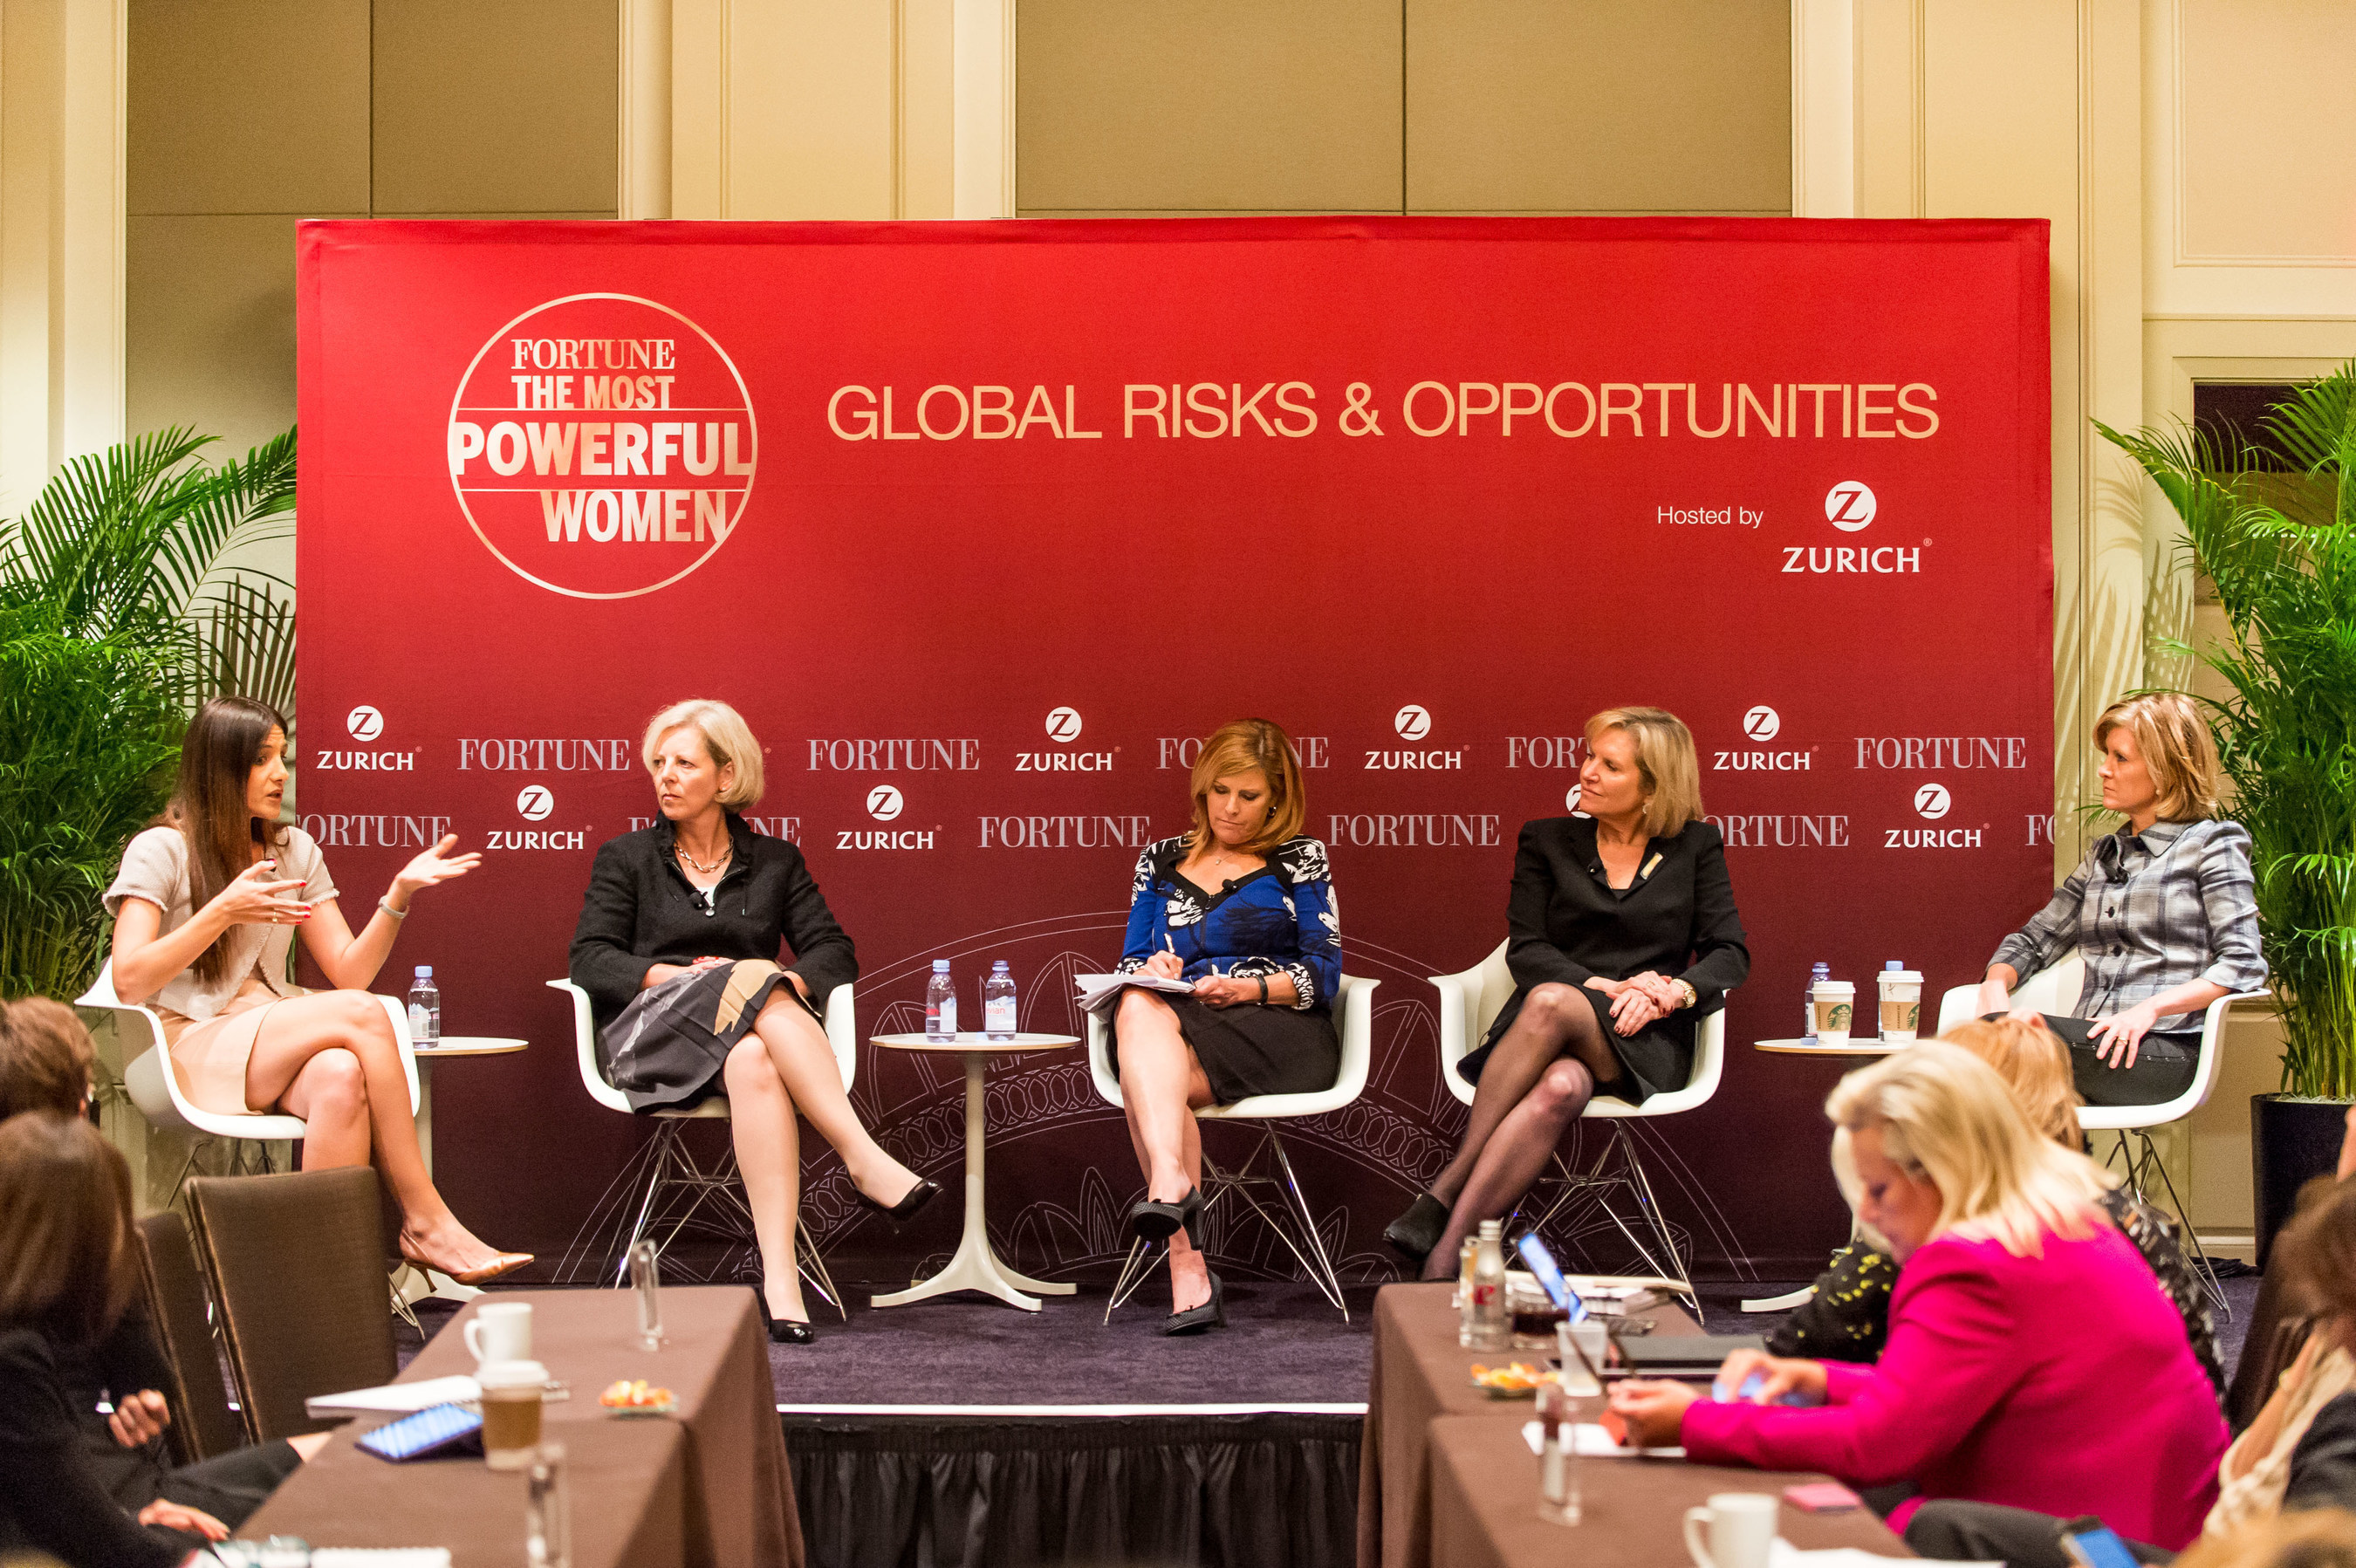 Photo credit: Stuart Isett/Fortune Most Powerful Women (From left to right: Efrat Peled, Isabelle Welton, Nina Easton, Susan Schwab, Mary Callahan Erdoes)